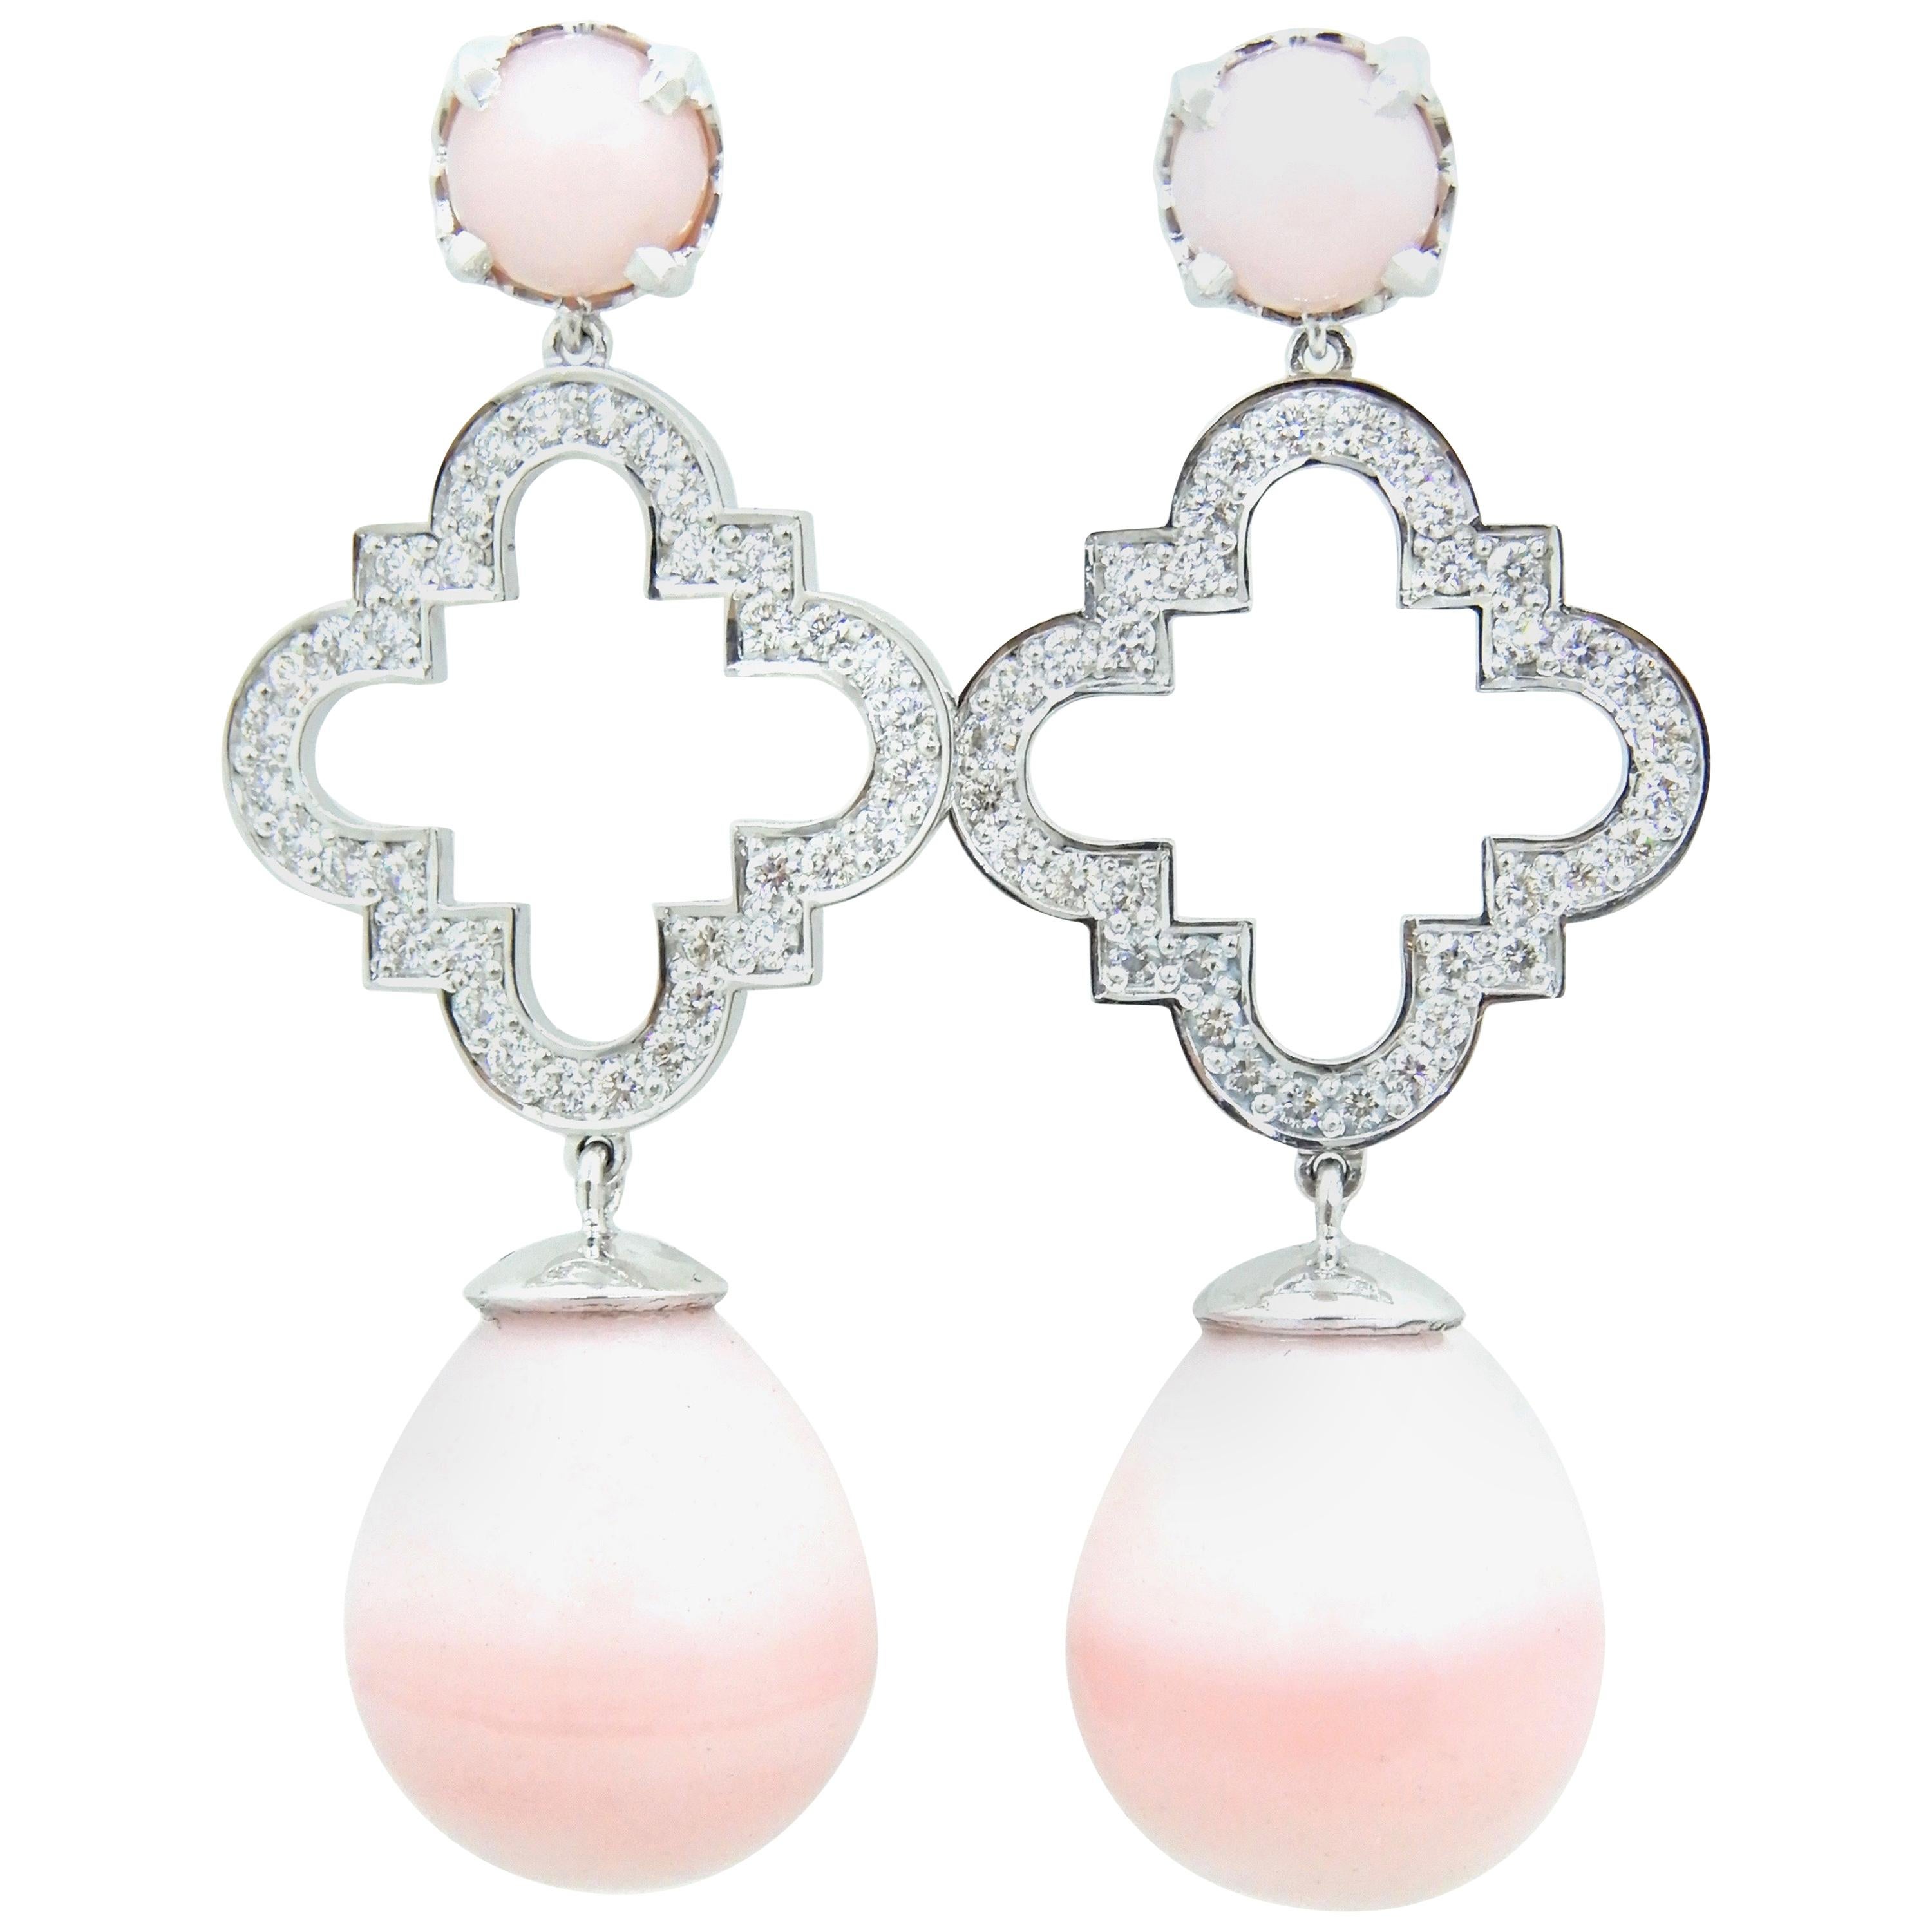 Peruvian Pink Opal Diamond and 18 Carat White Gold Earrings For Sale